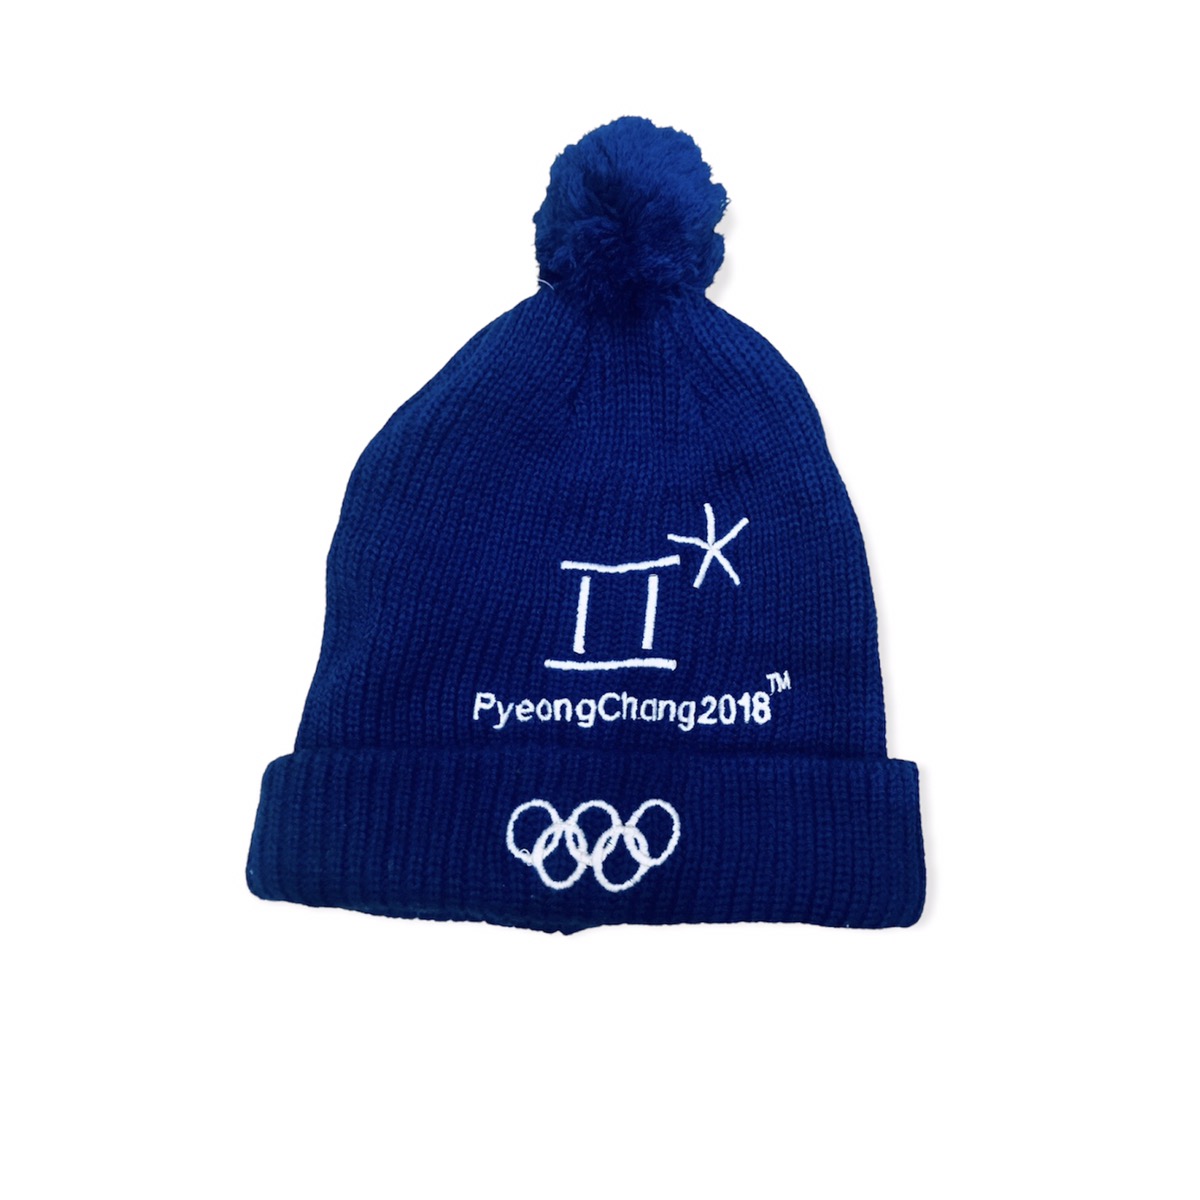 Vintage - Olympic 2018 Pyeong Chang Beanie Hat - 1